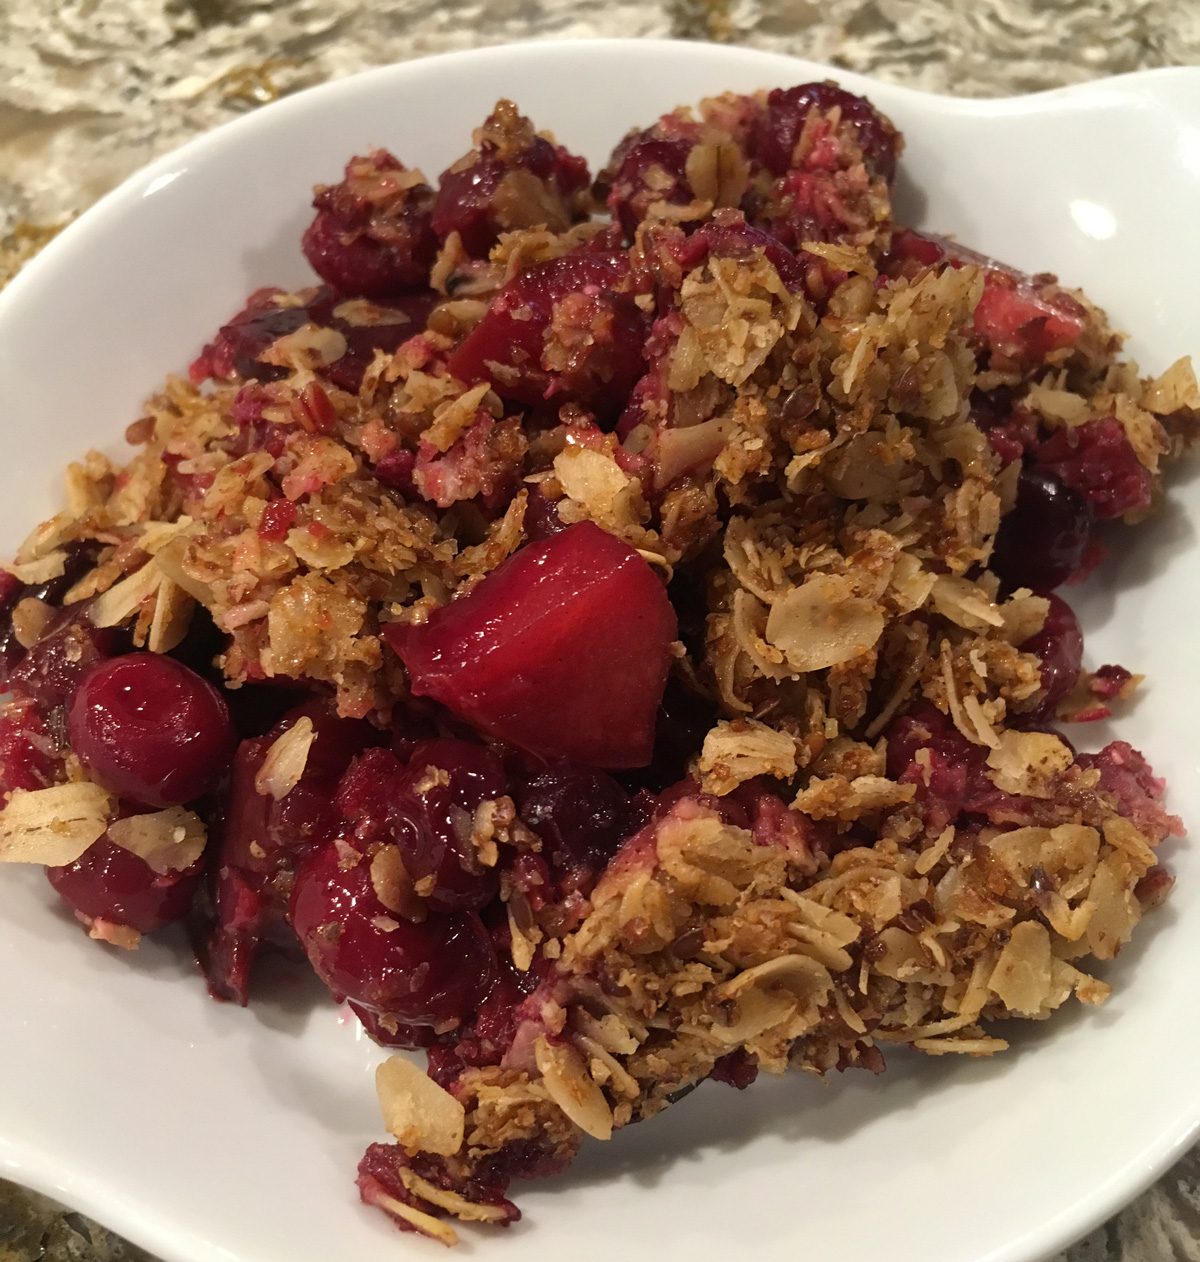 Cherry Berry Crumble, by Cathy Leman MA, RD, LD